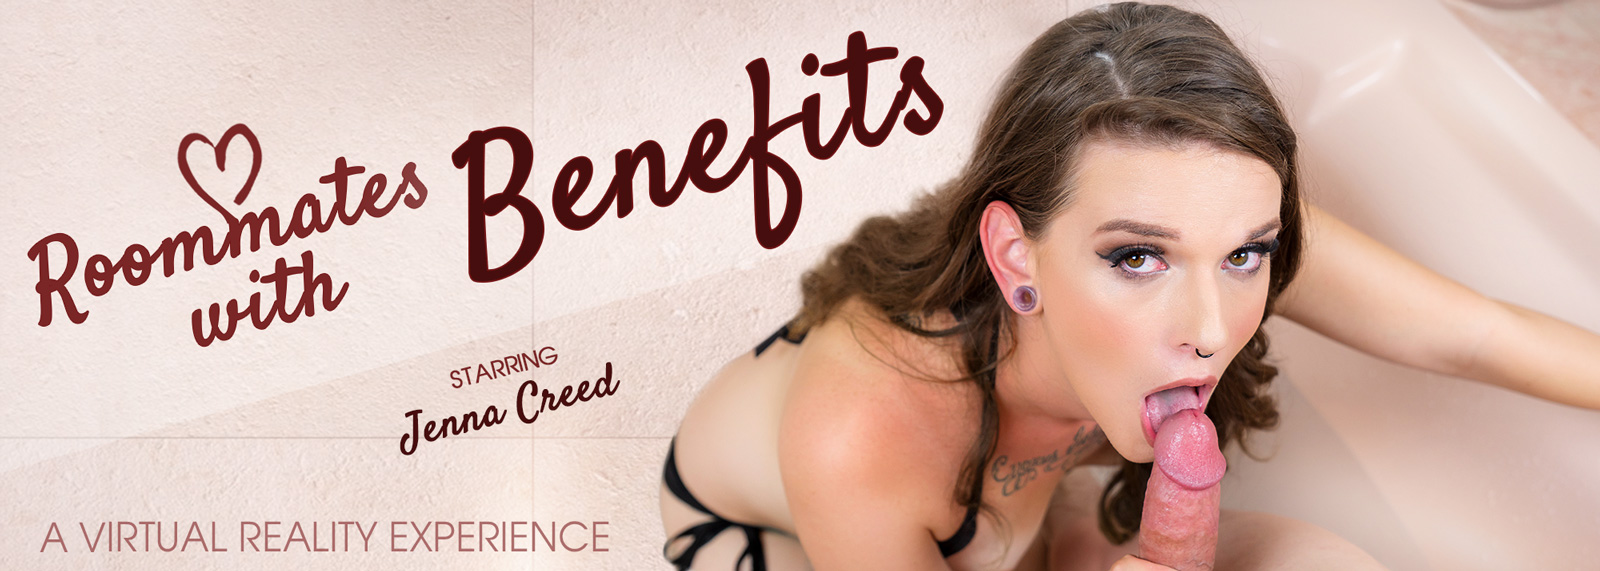 Roommates with Benefits - VR Porn Video, Starring: Jenna Creed VR